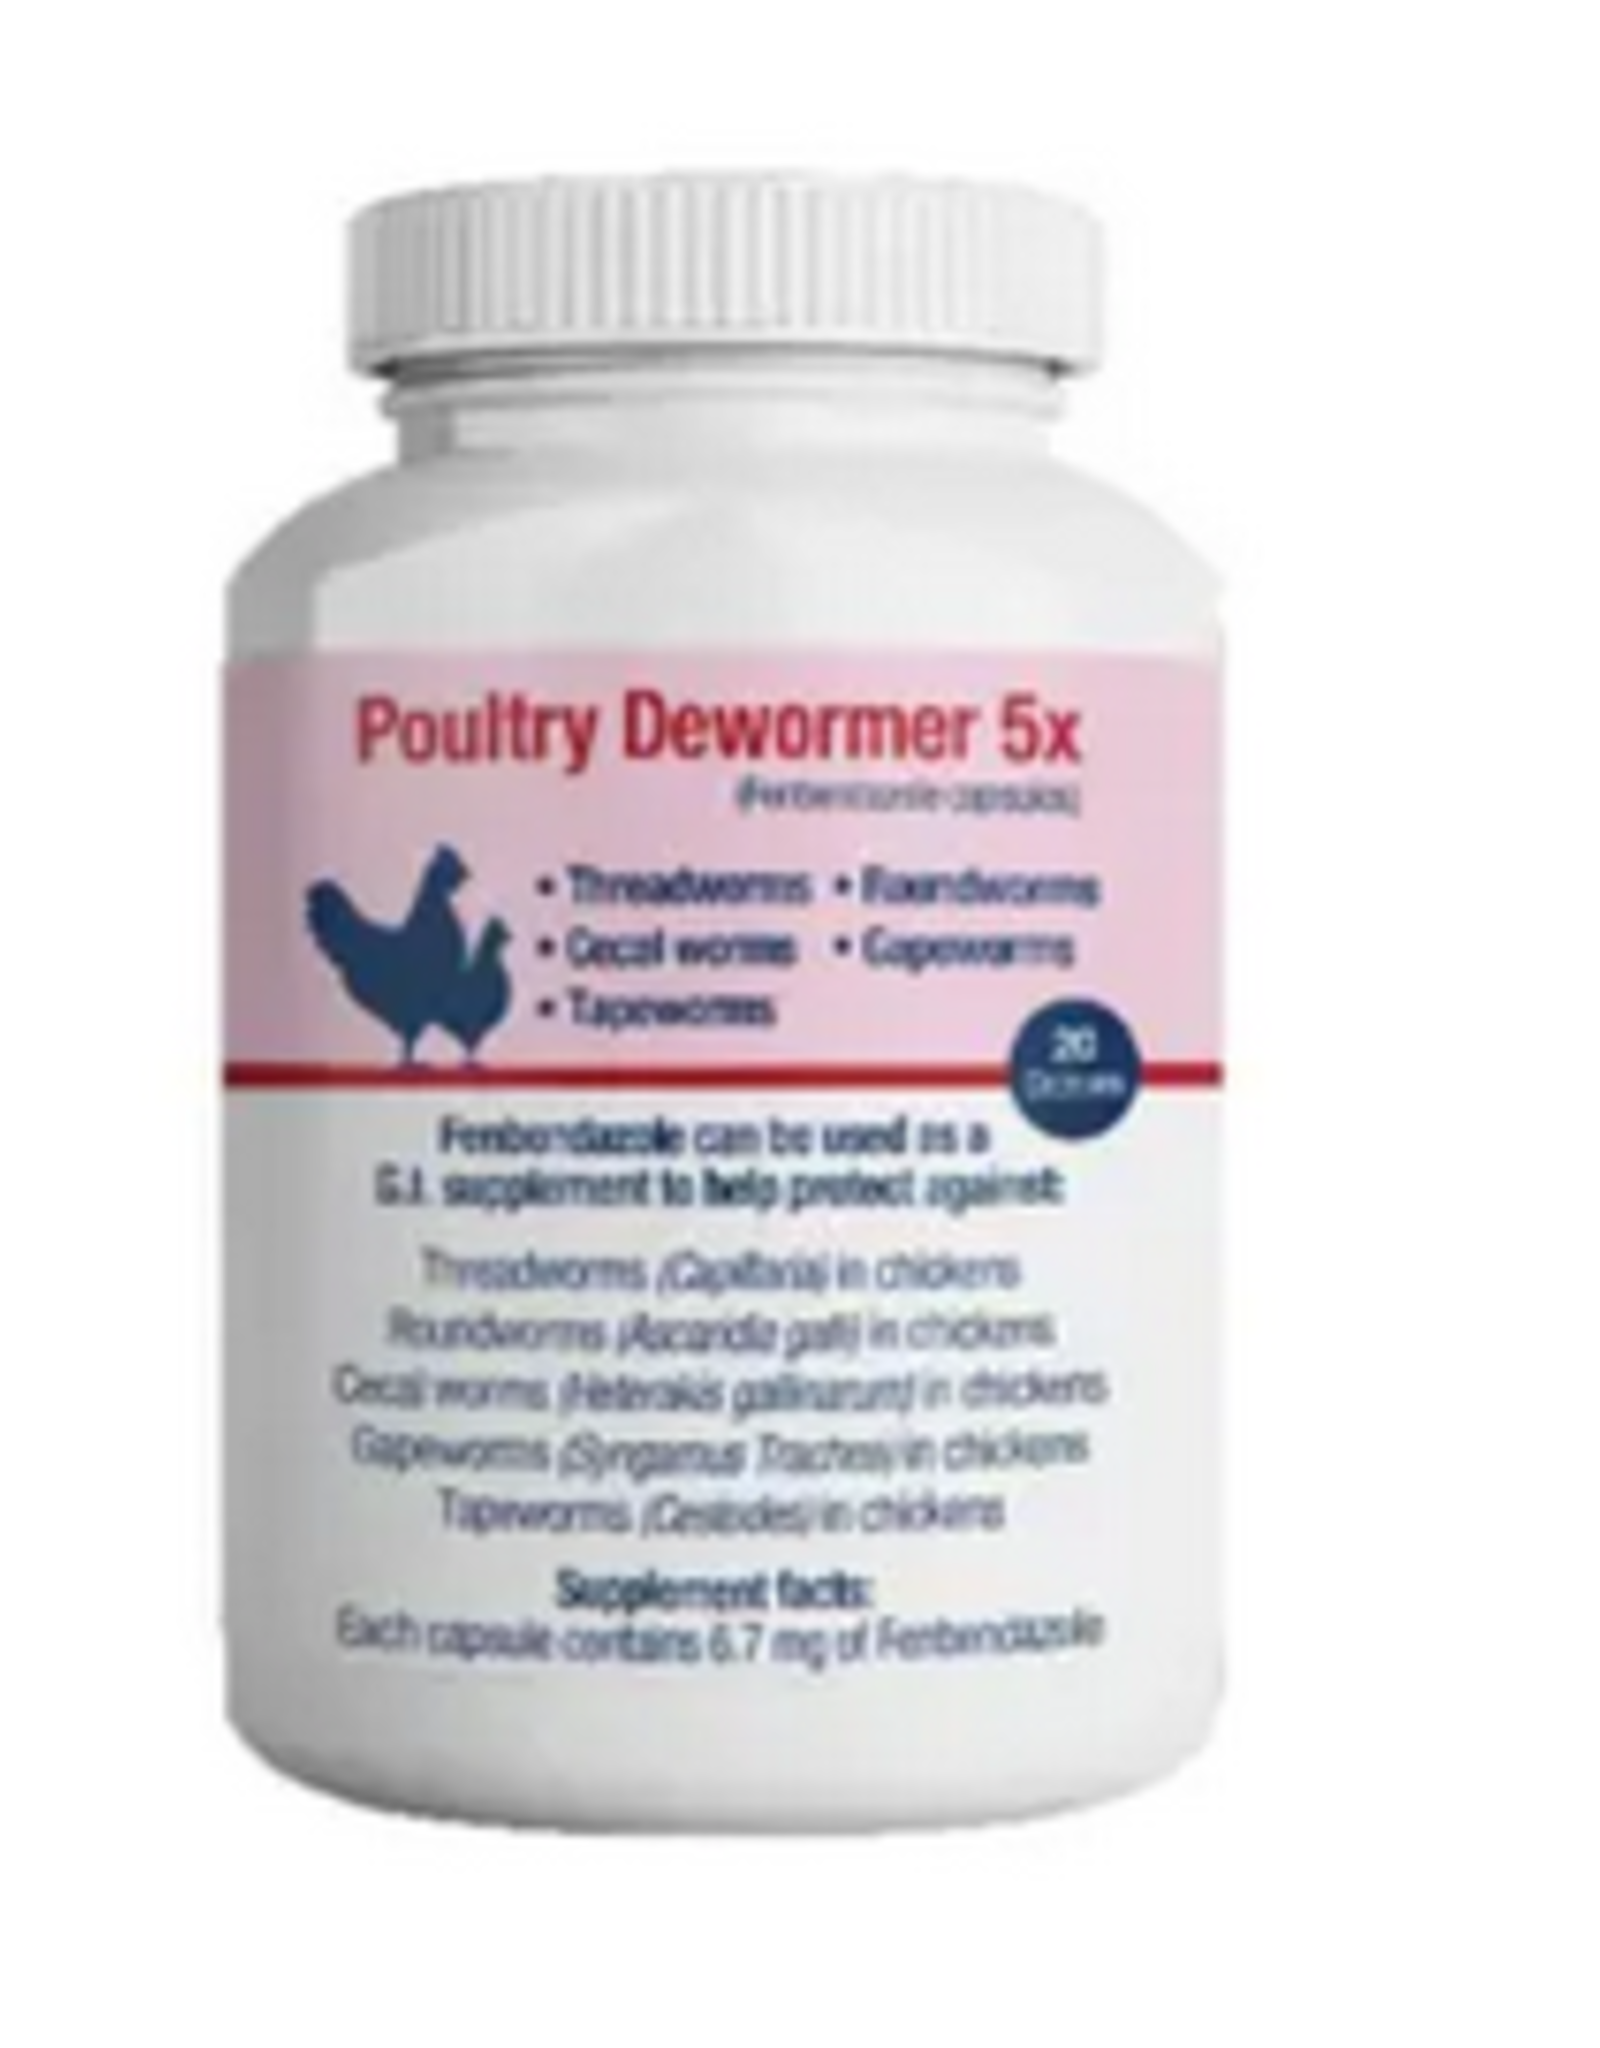 POULTRY DEWORMER 5X G.I 20ct